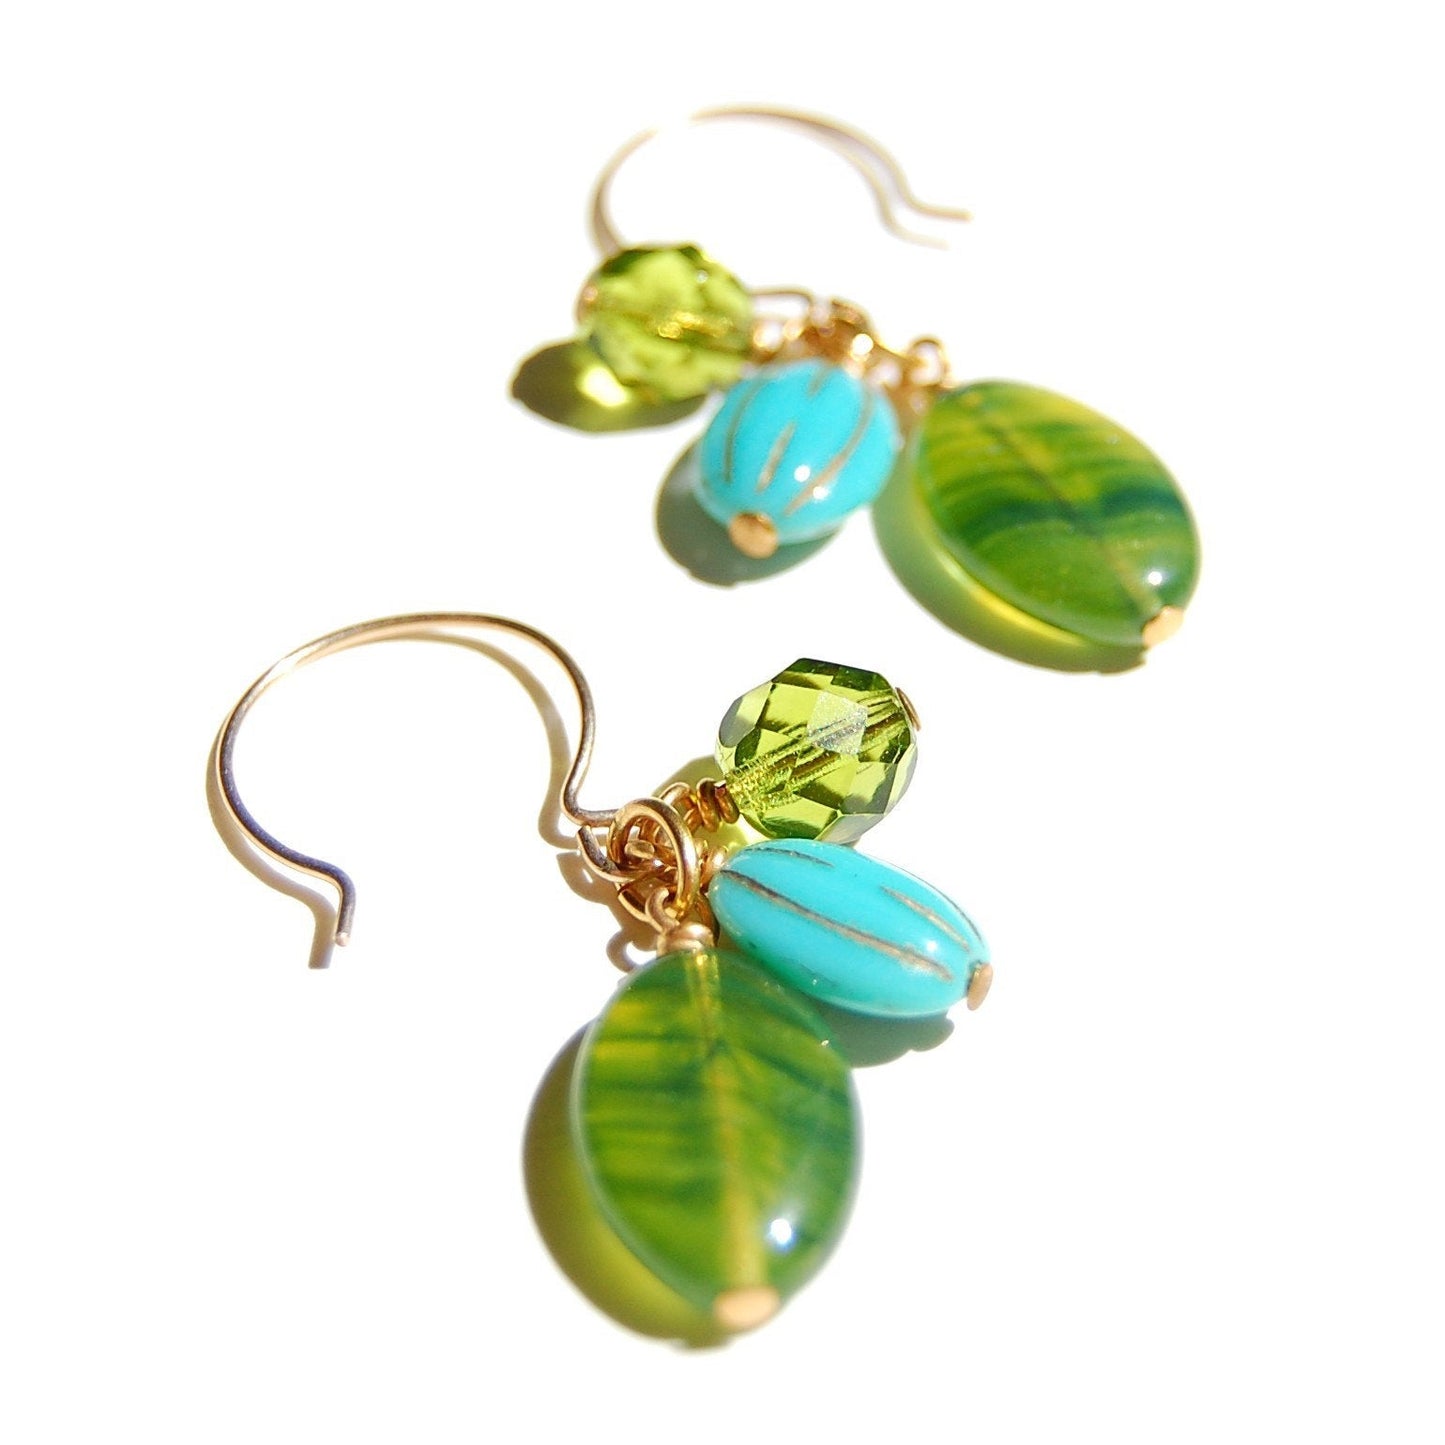 Triple drop cluster earring with Czech glass beads in greens and blue